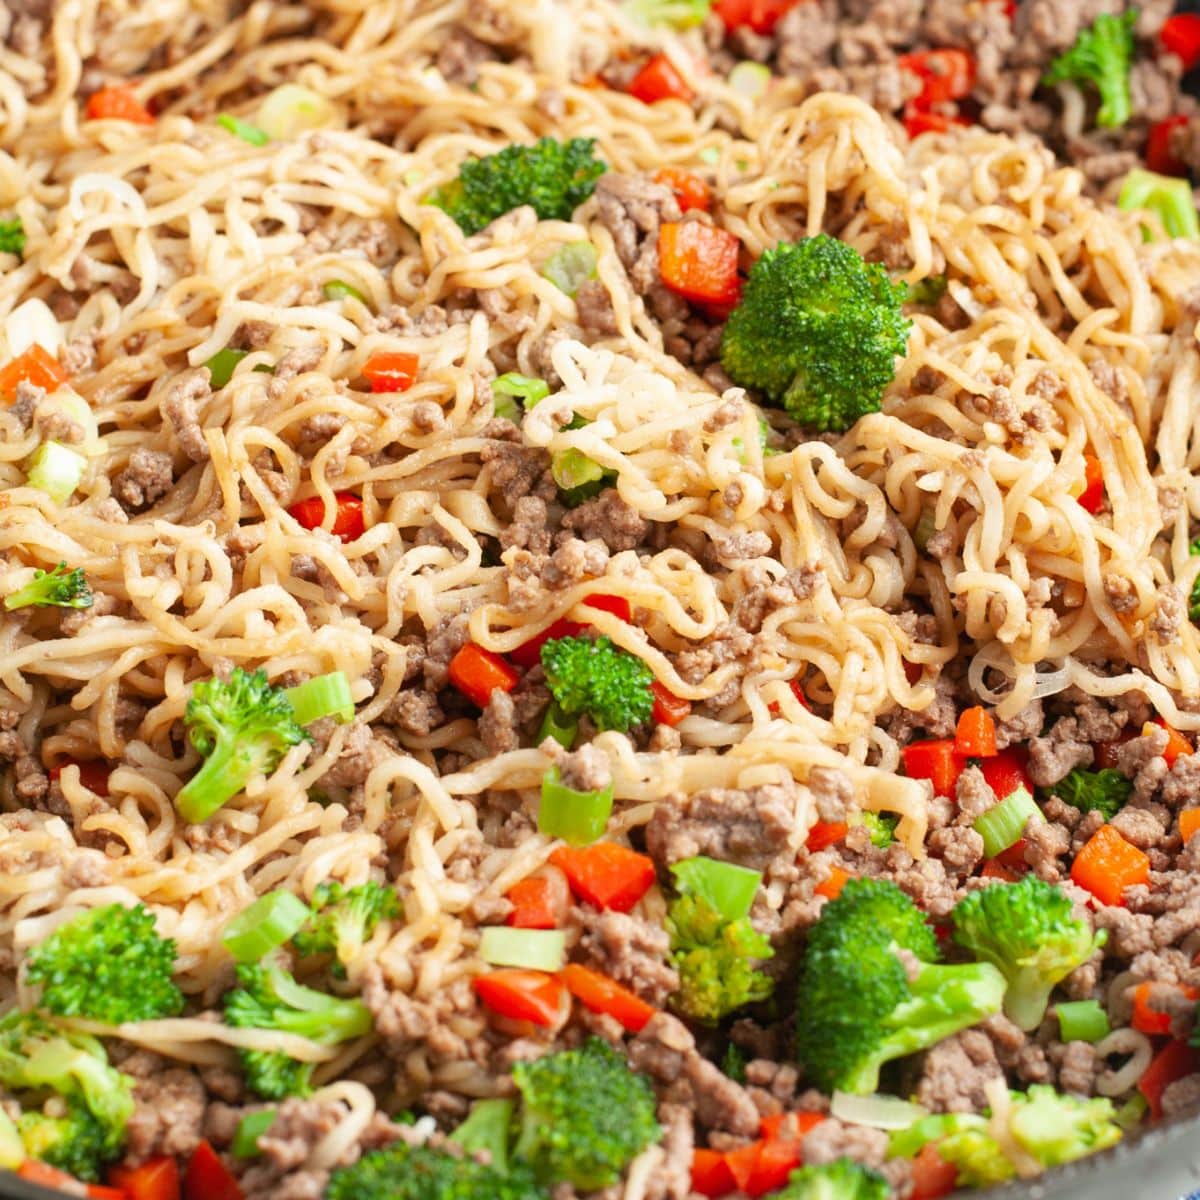 Ramen noodles with vegetables and ground beef. 